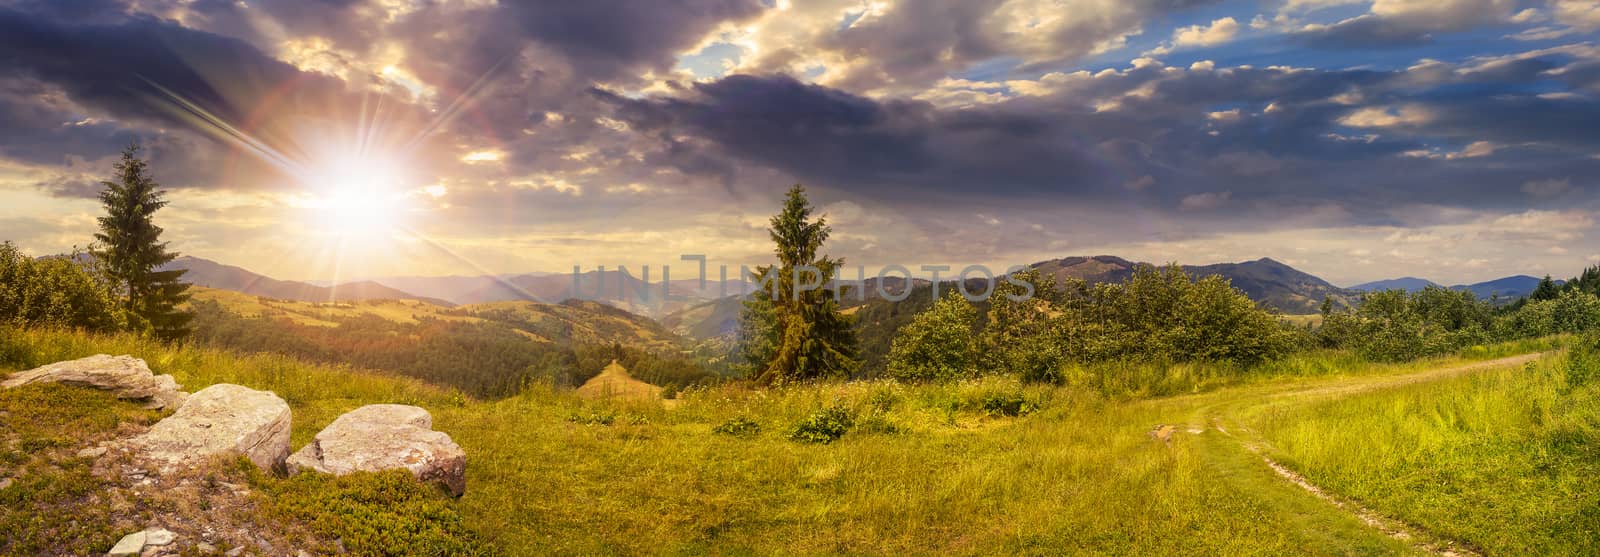 boulders on hillside meadow in mountain at sunset by Pellinni